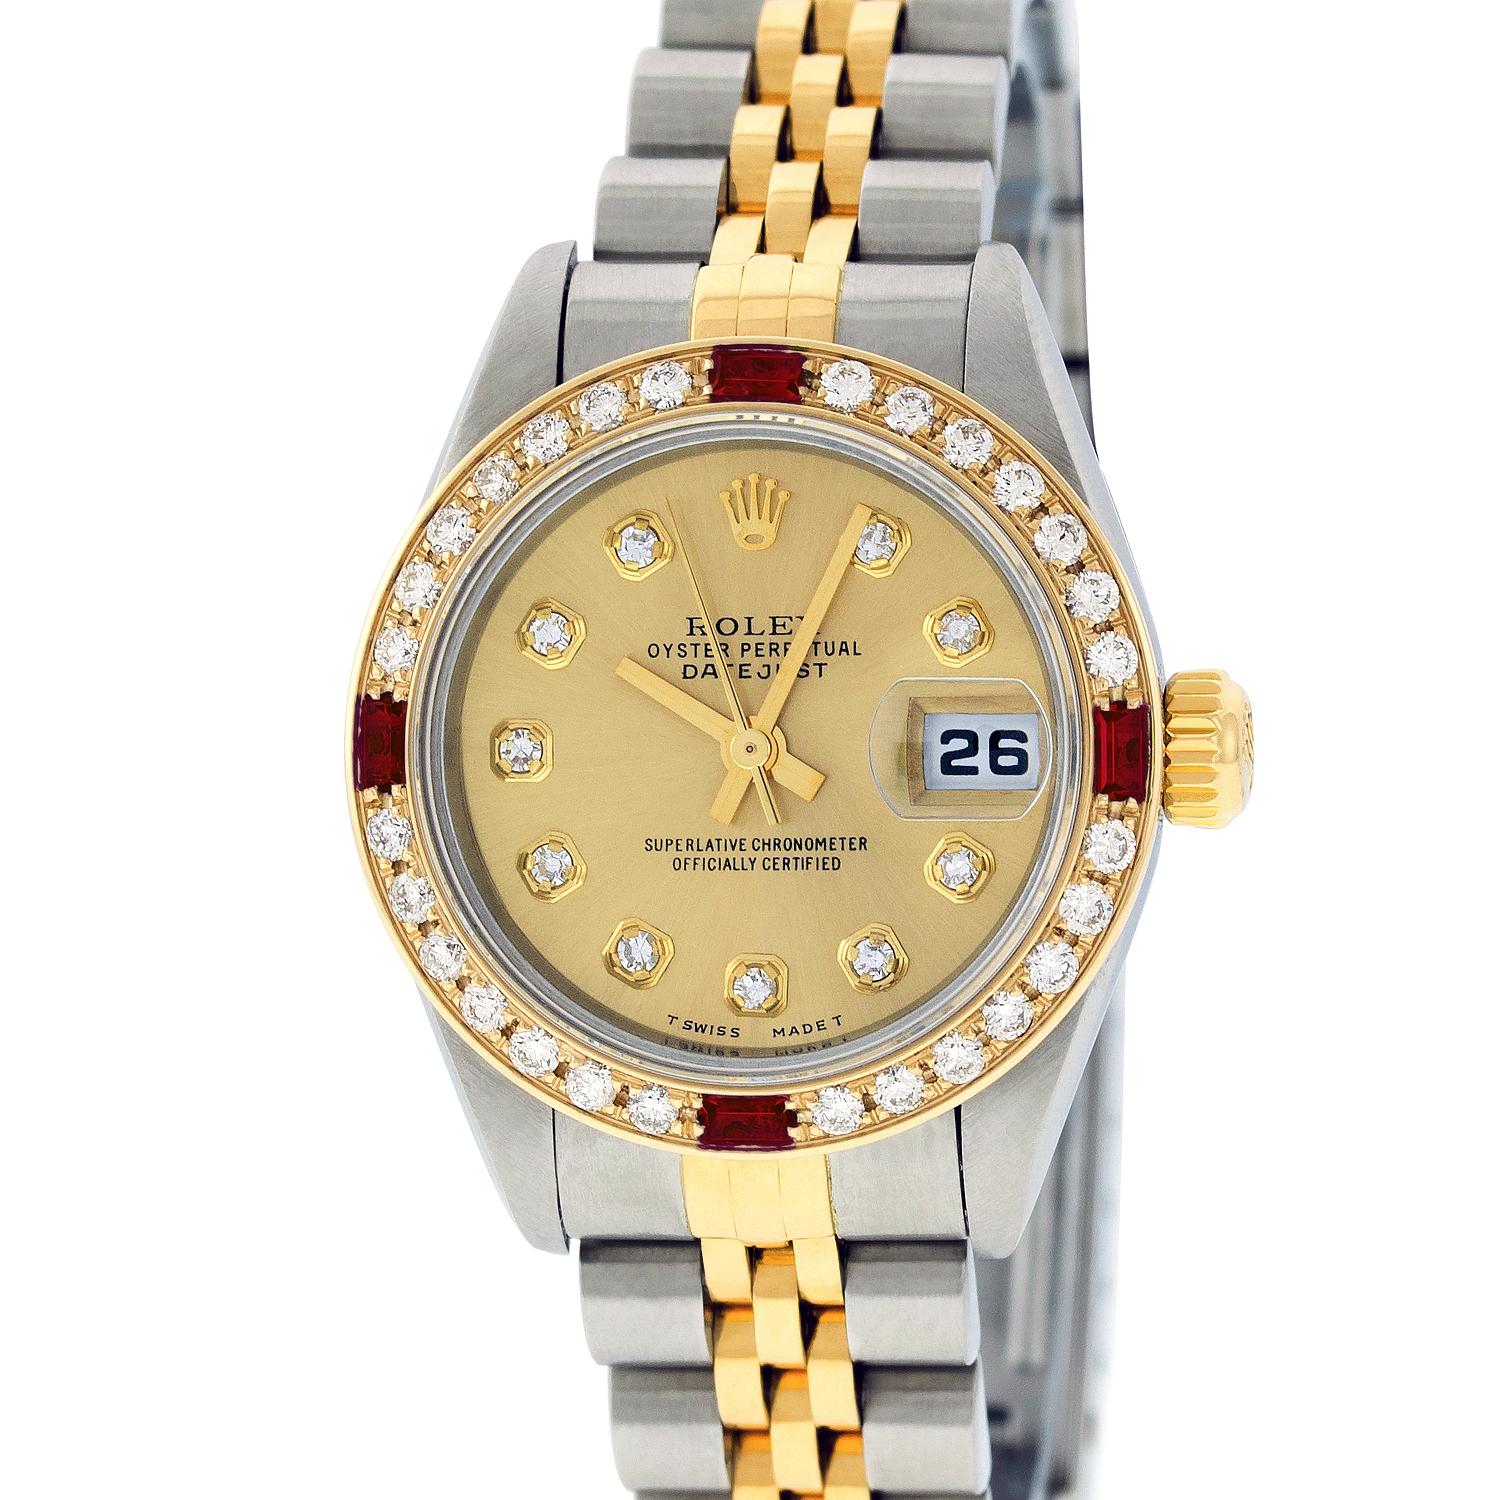 WATCH DESCRIPTION
 
BRAND : Rolex
MODEL : Datejust
CASE SIZE : 26mm
CASE : Rolex Stainless Steel Case
GENDER : Women's

WATCH FEATURES
 
DIAL : Rolex Professionally Refinished Champagne Dial set with aftermarket Genuine (VVS H Color) Diamond Hour